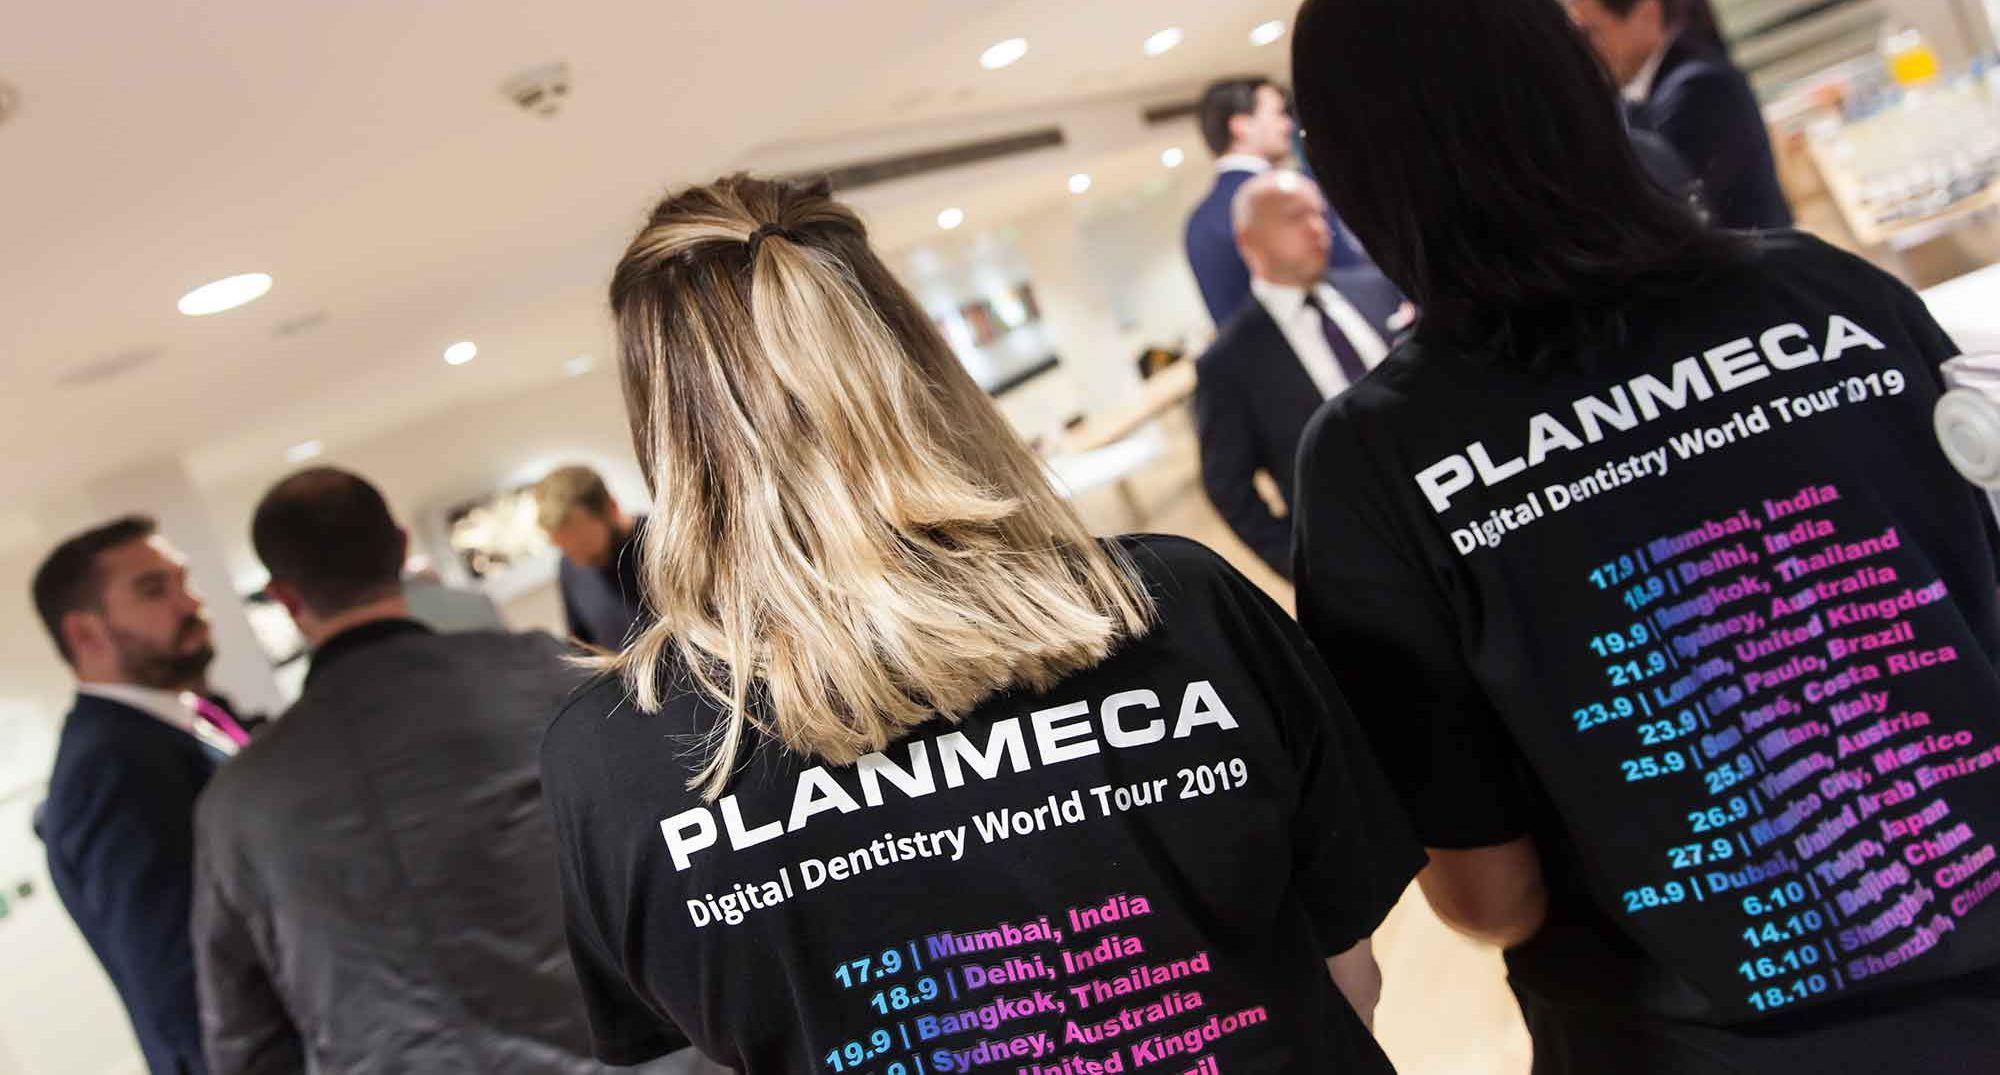 What happened at the Digital Dentistry World Tour